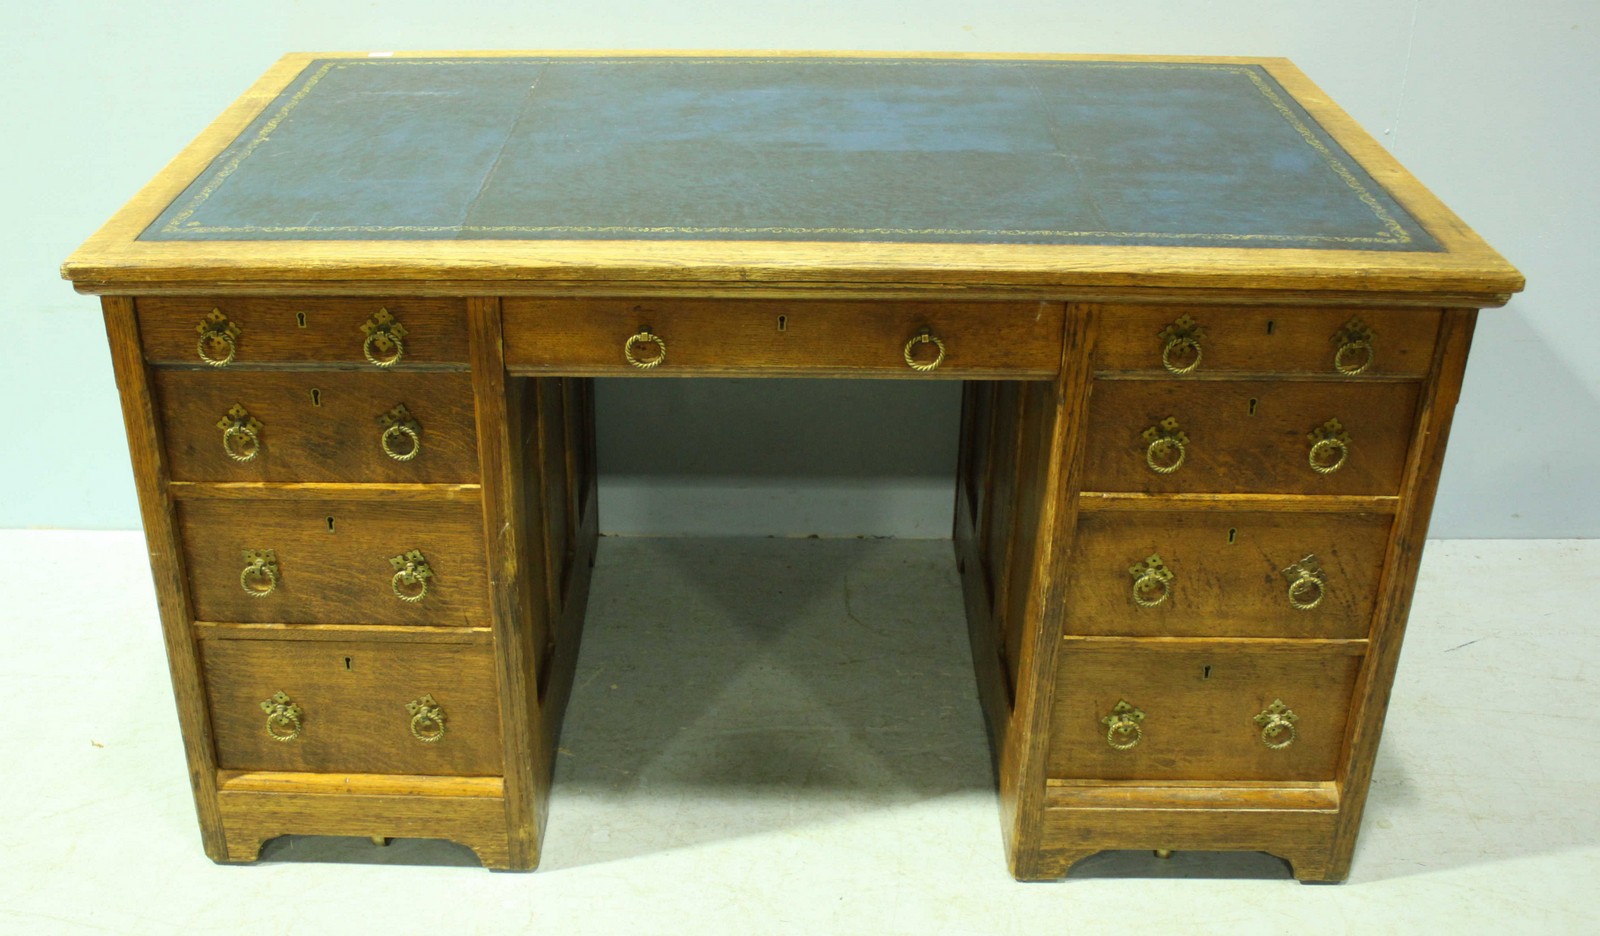 A 19th century oak pedestal desk in the Gothic Reform 'style' with gilt-tooled blue leather